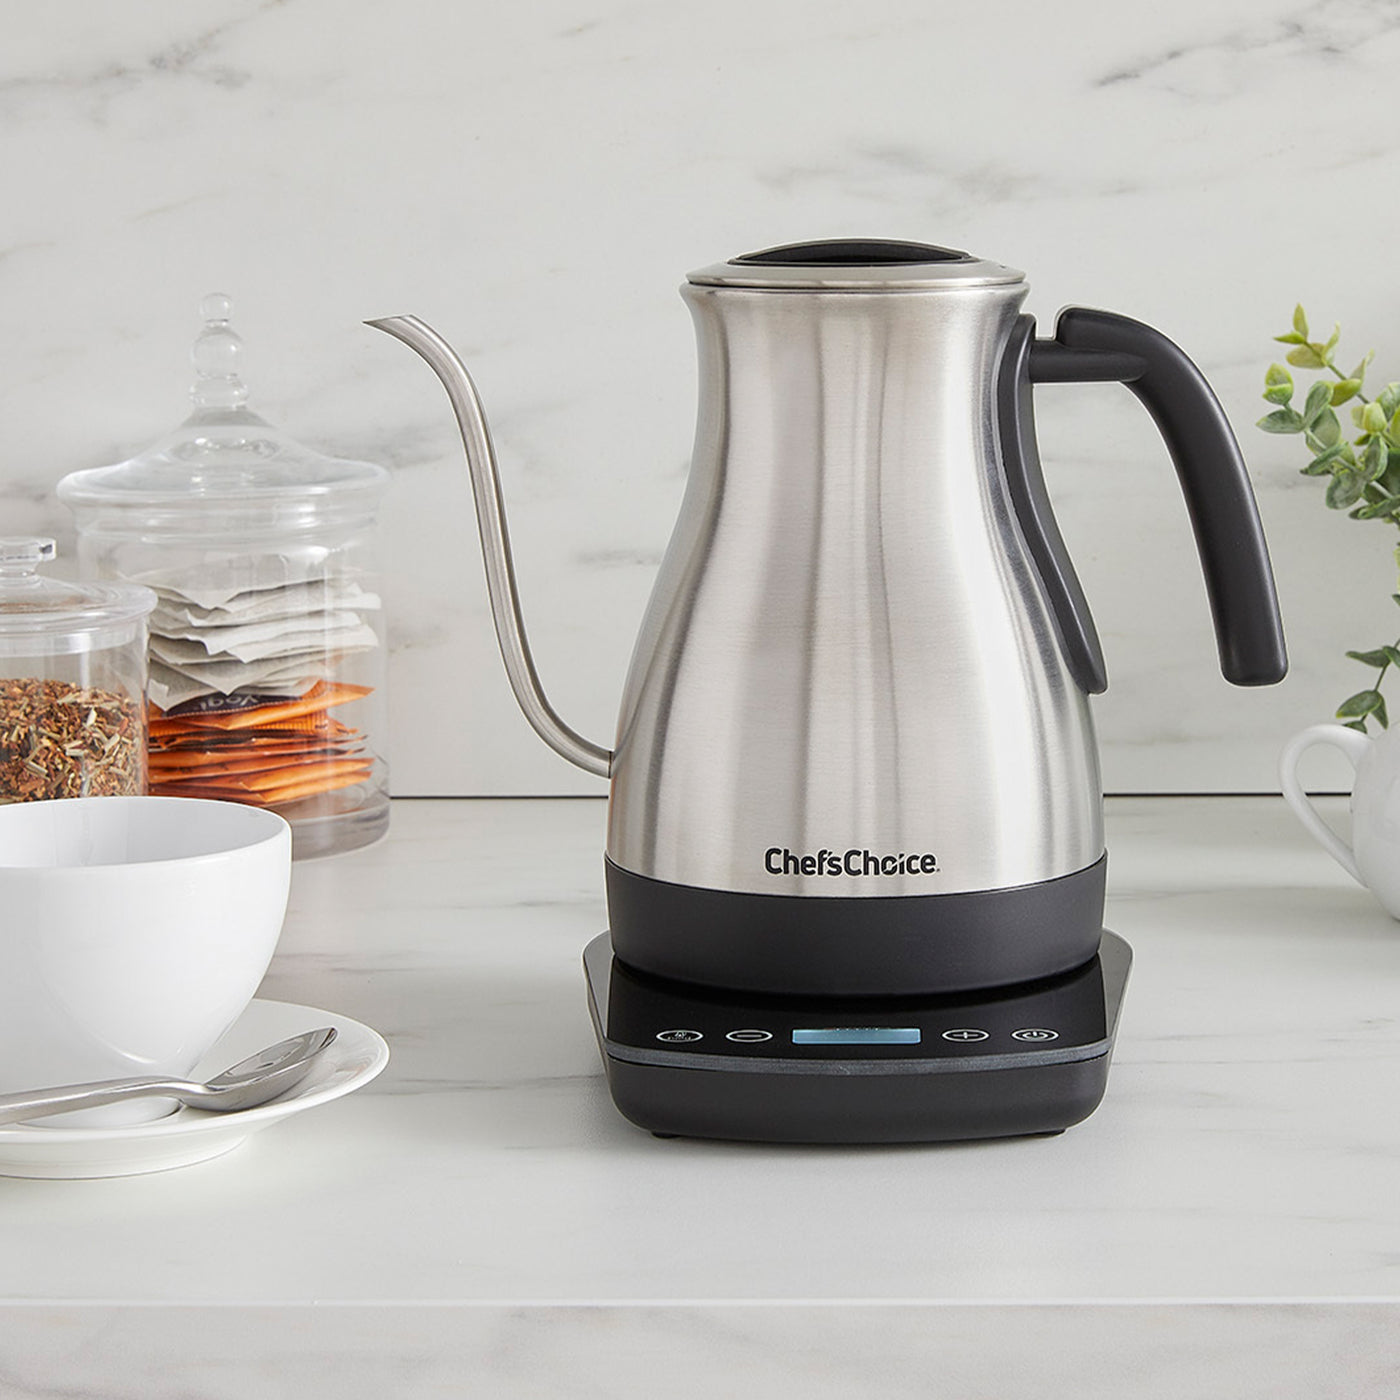 A kettle with temp control is a very nice thing to have when